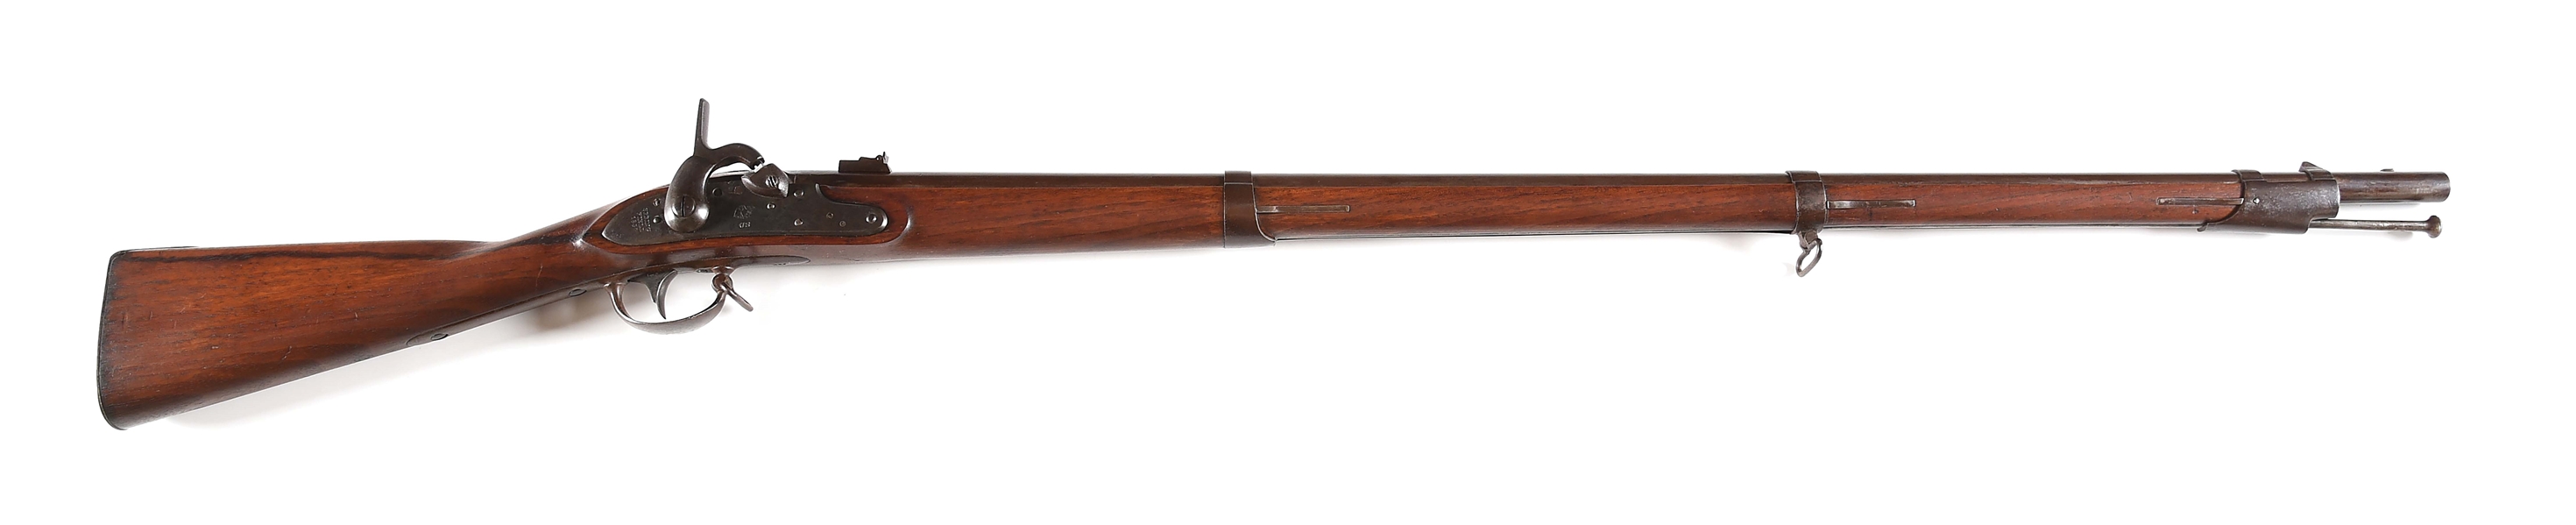 (A) HEWES & PHILLIPS NEW JERSEY MARKED CONVERTED SPRINGFIELD M1816 PERCUSSION RIFLED MUSKET.